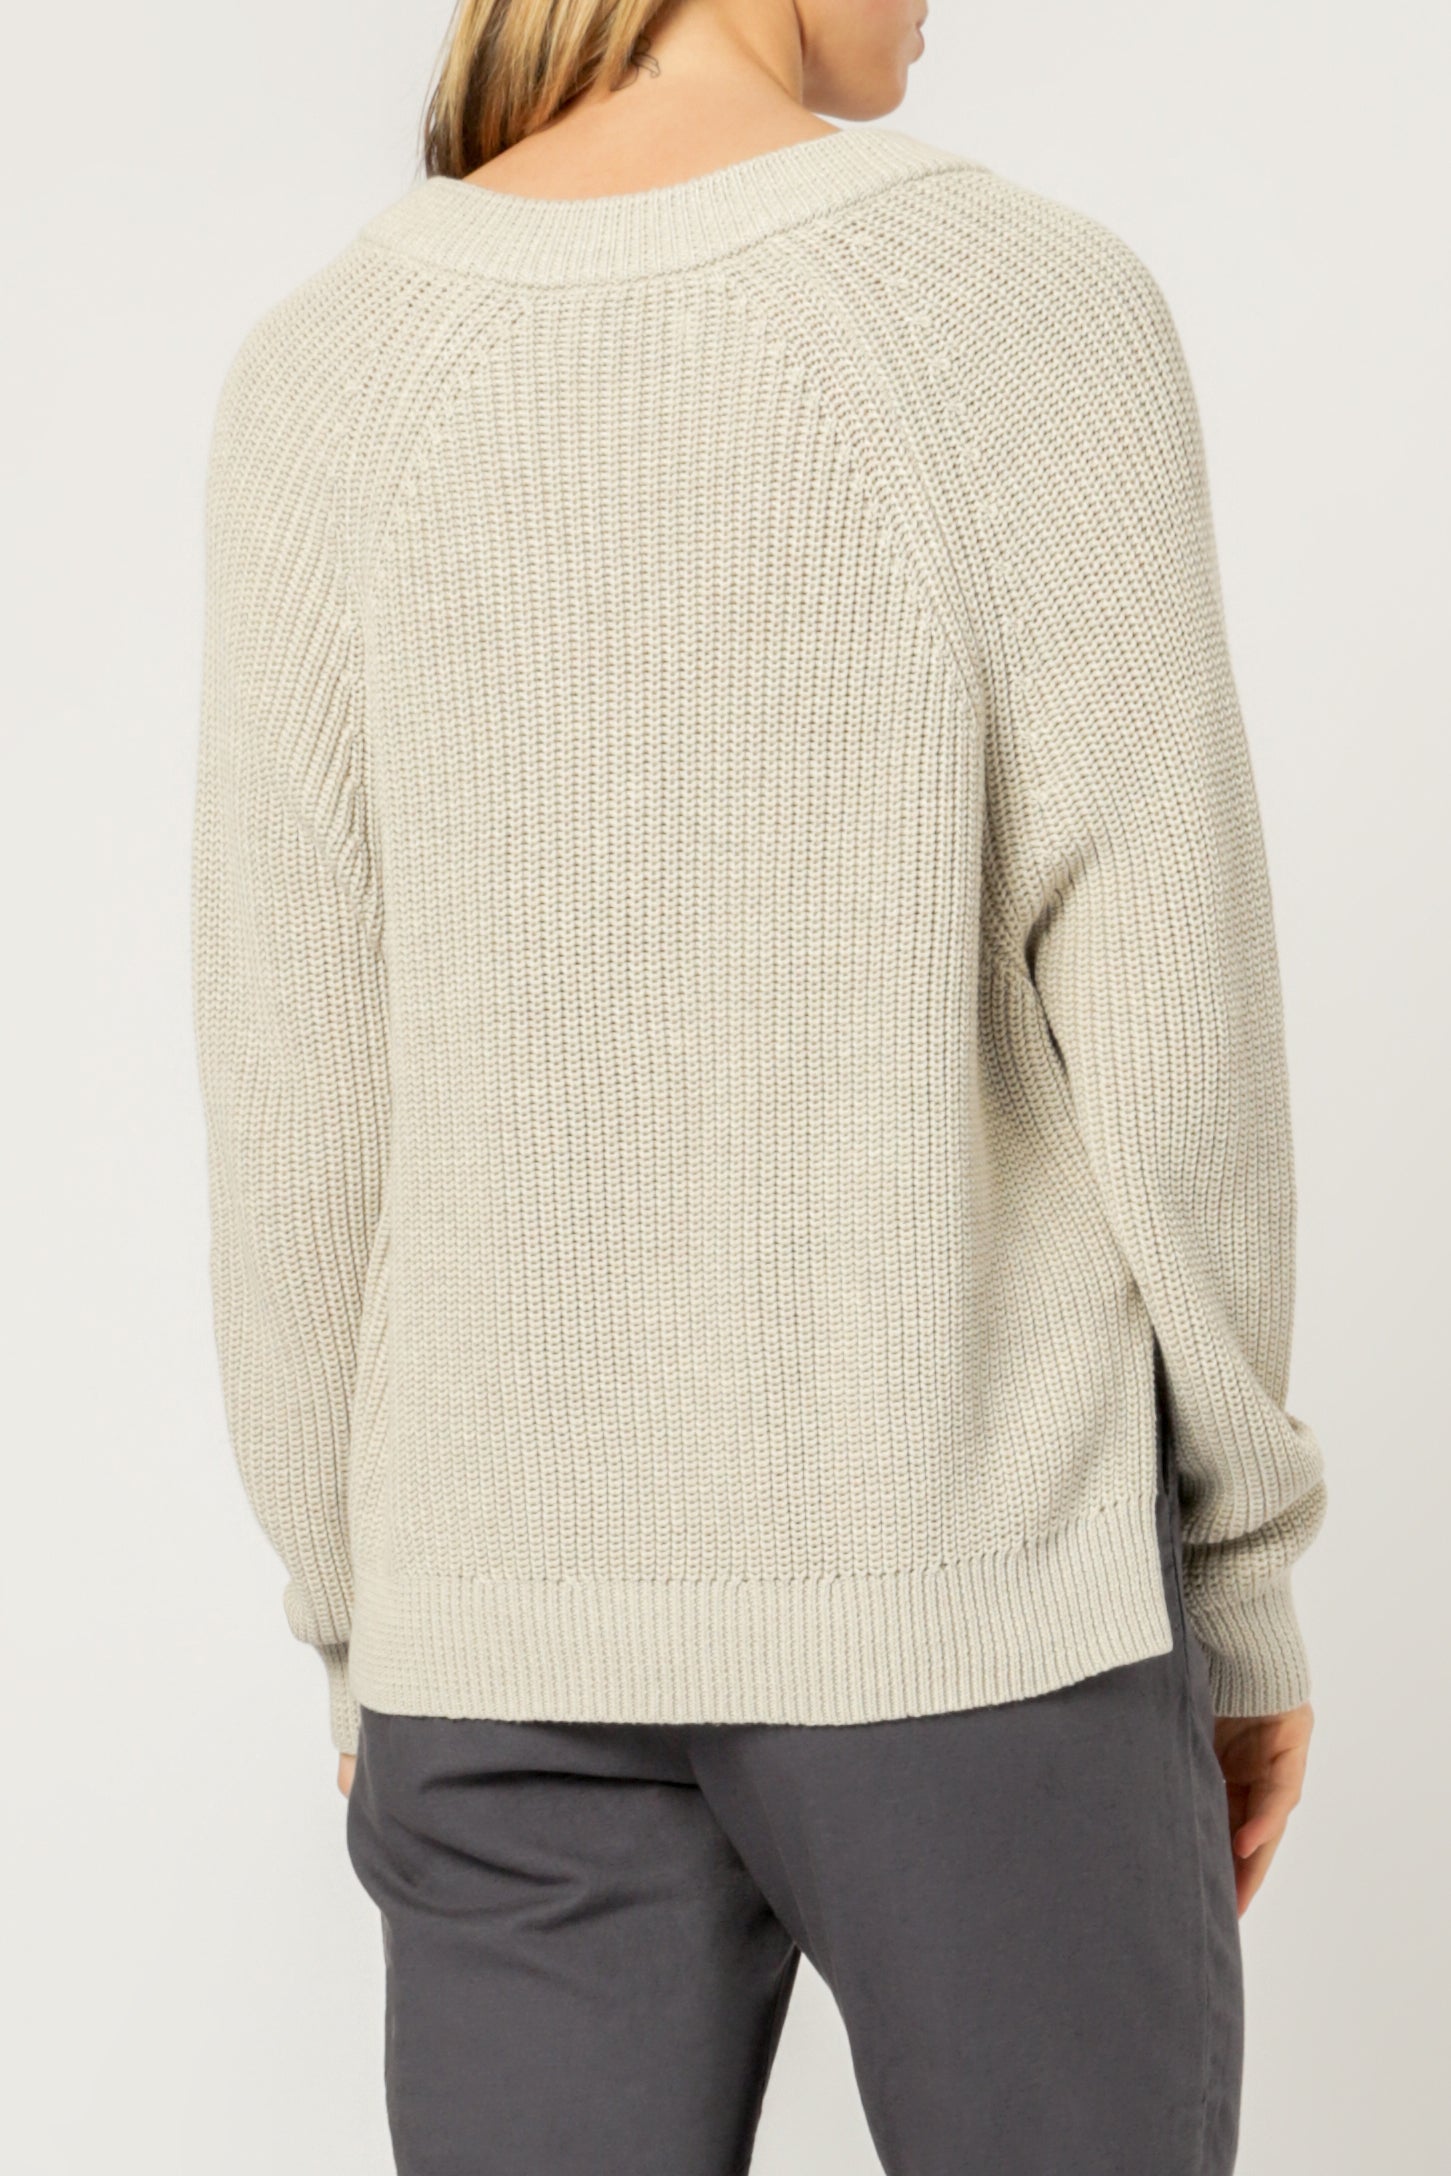 Nude Lucy kimber v neck knit cream marle knitwear